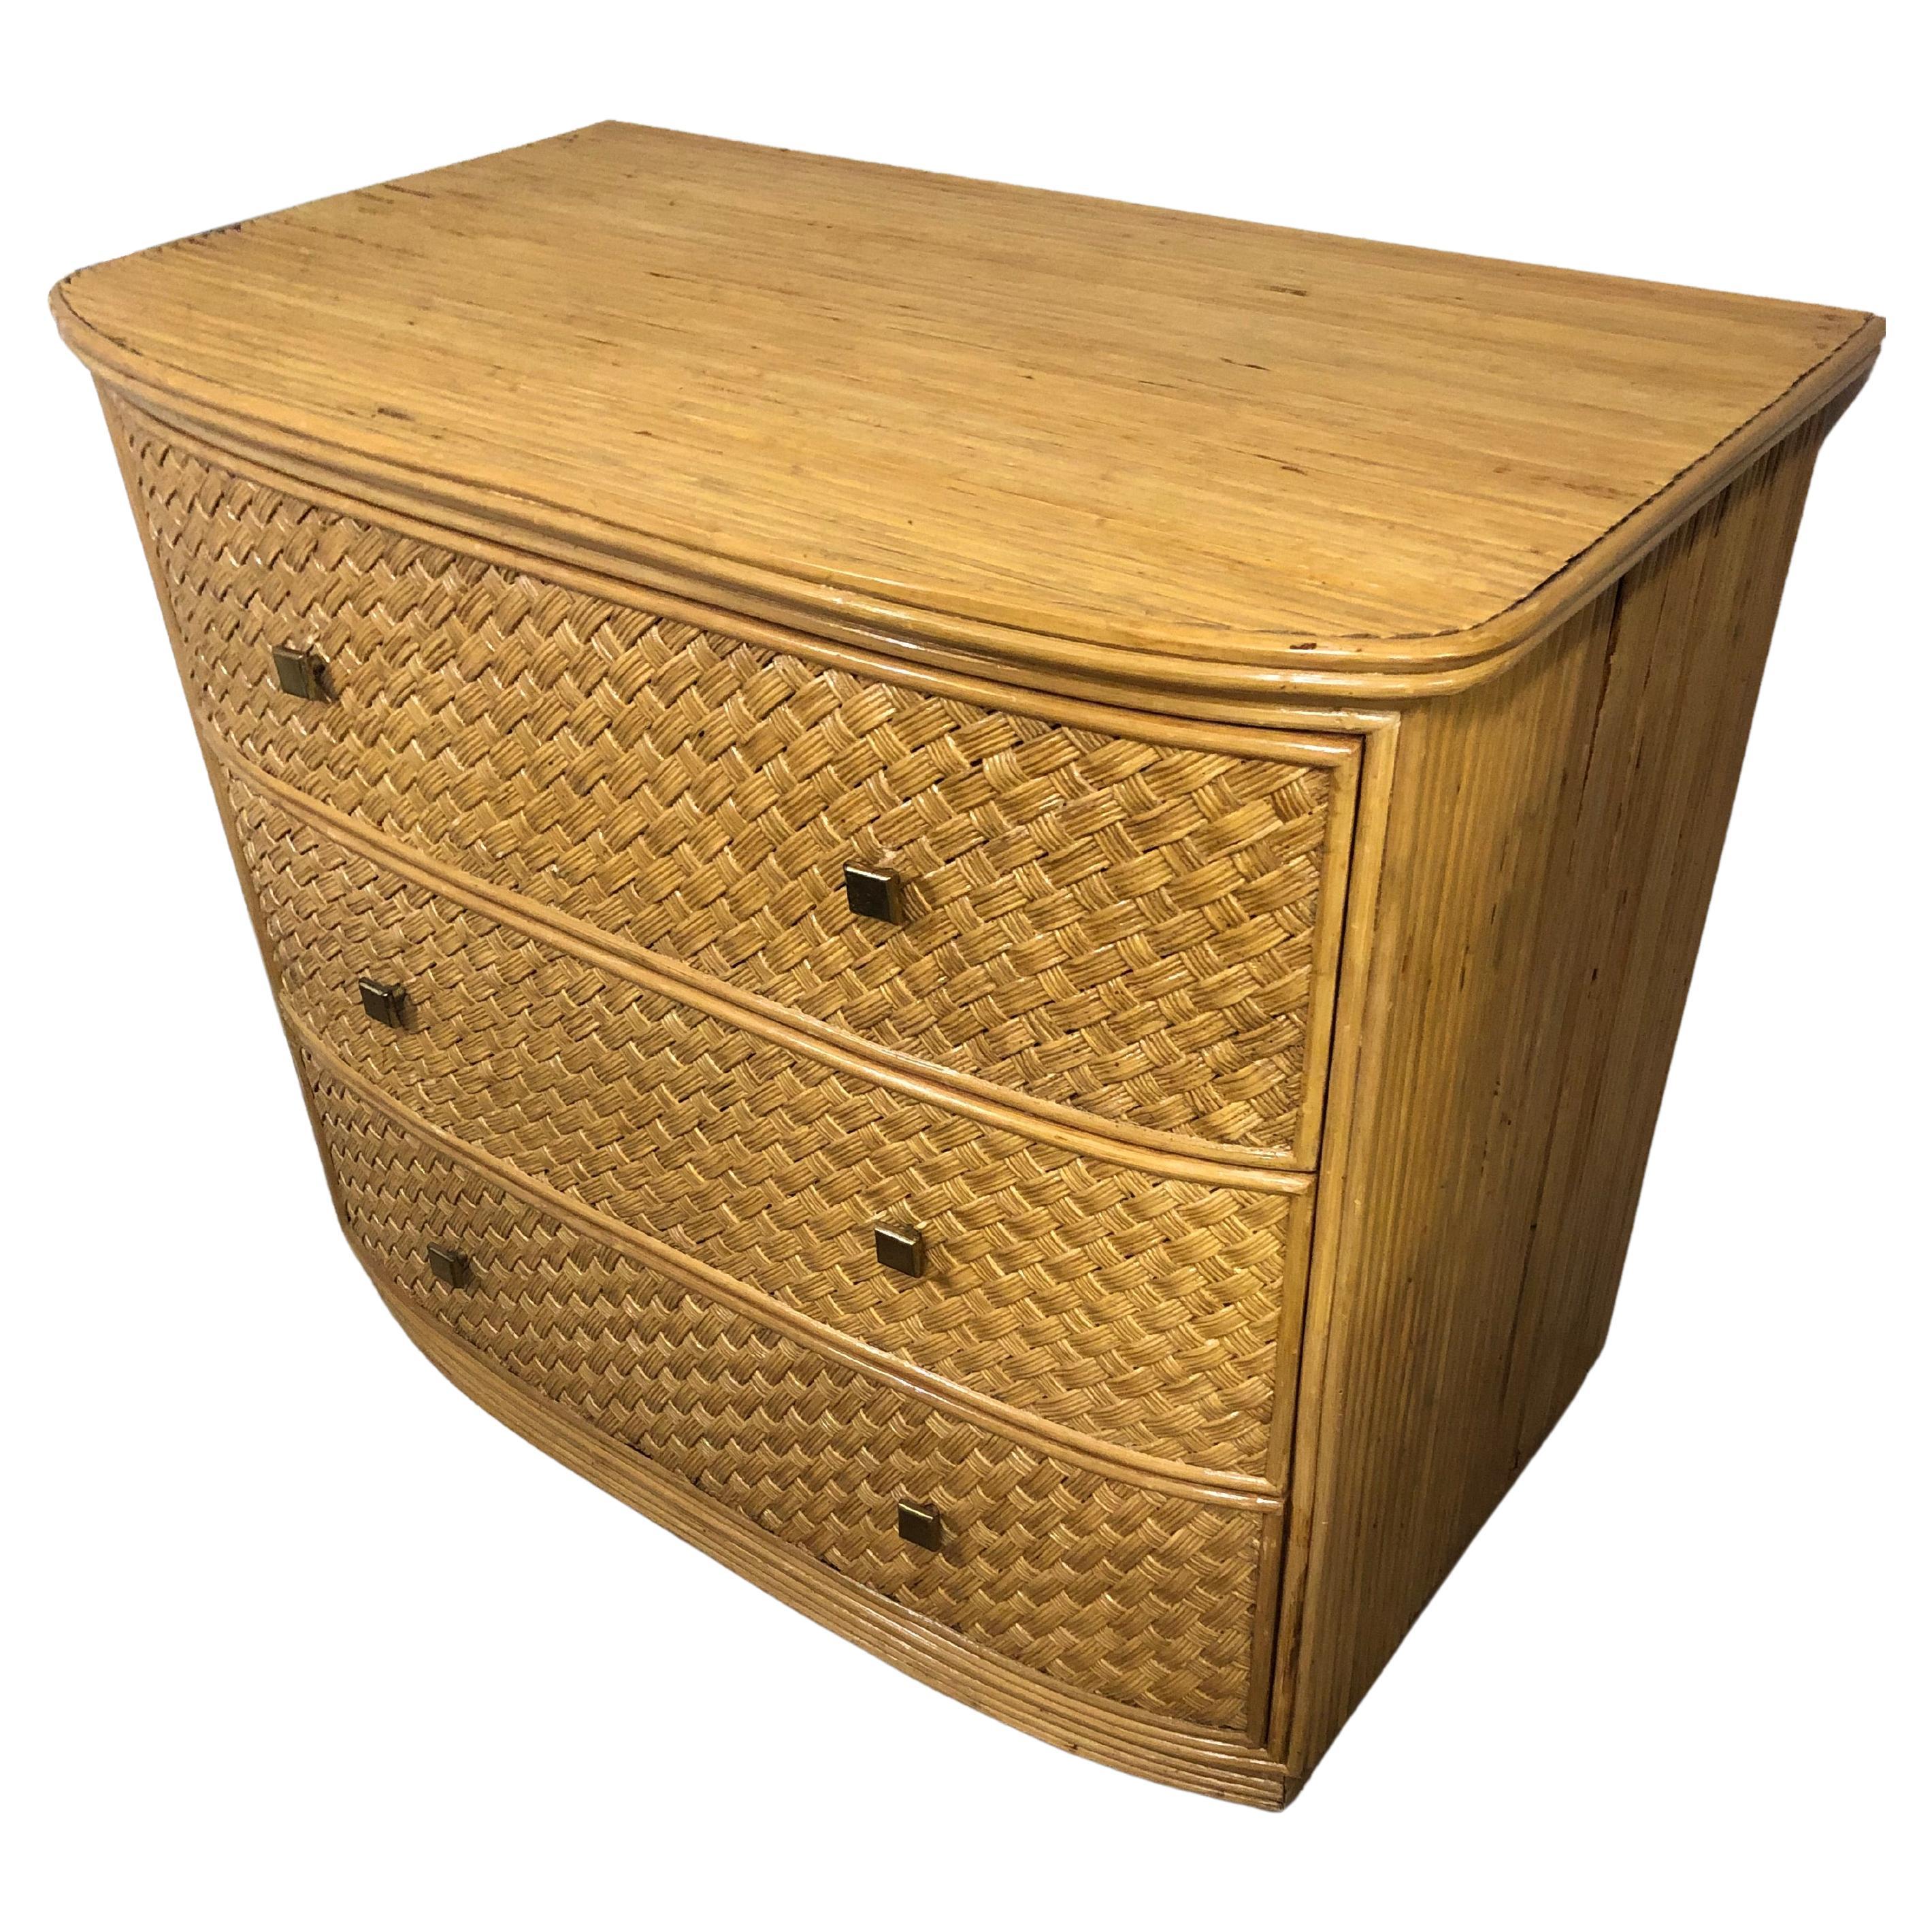 Stylish Woven Bamboo Rattan Chest of Drawers Commode